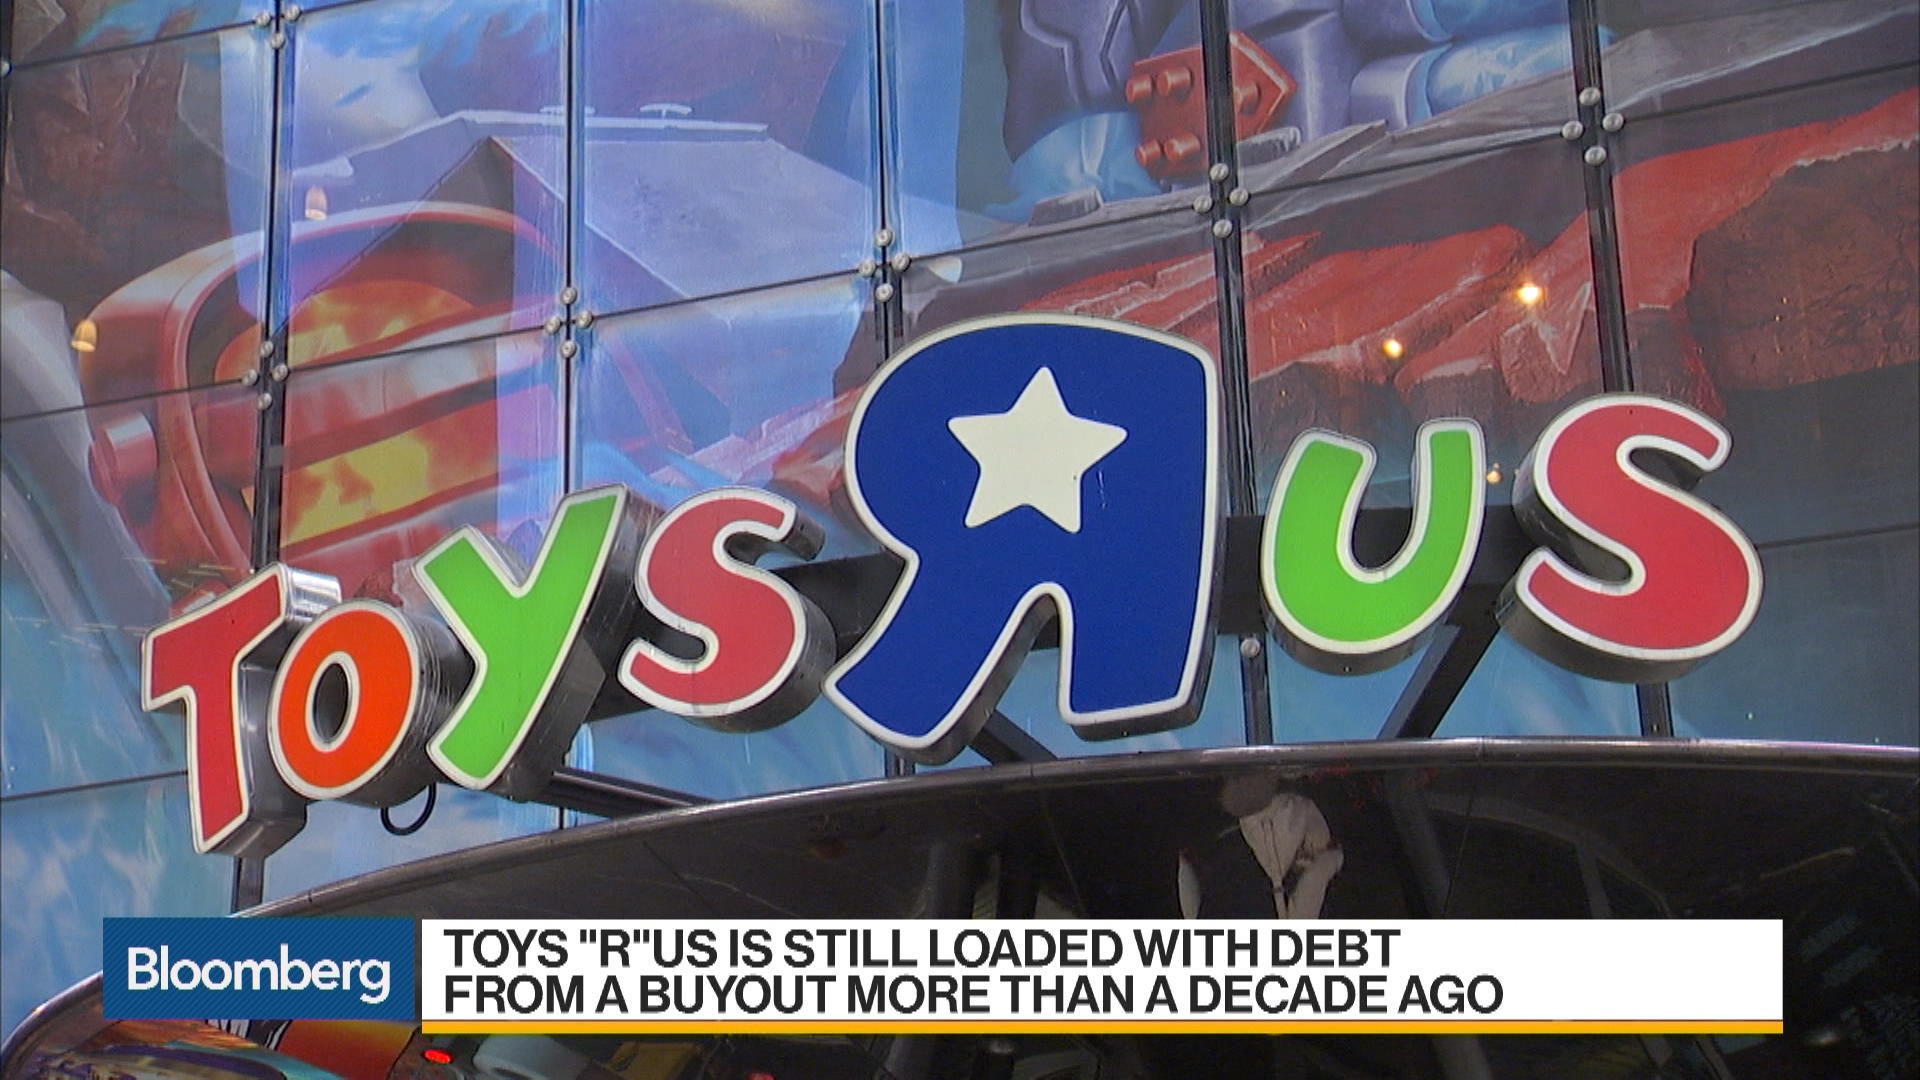 Toys R bankruptcy: Why it went bust - CBS News